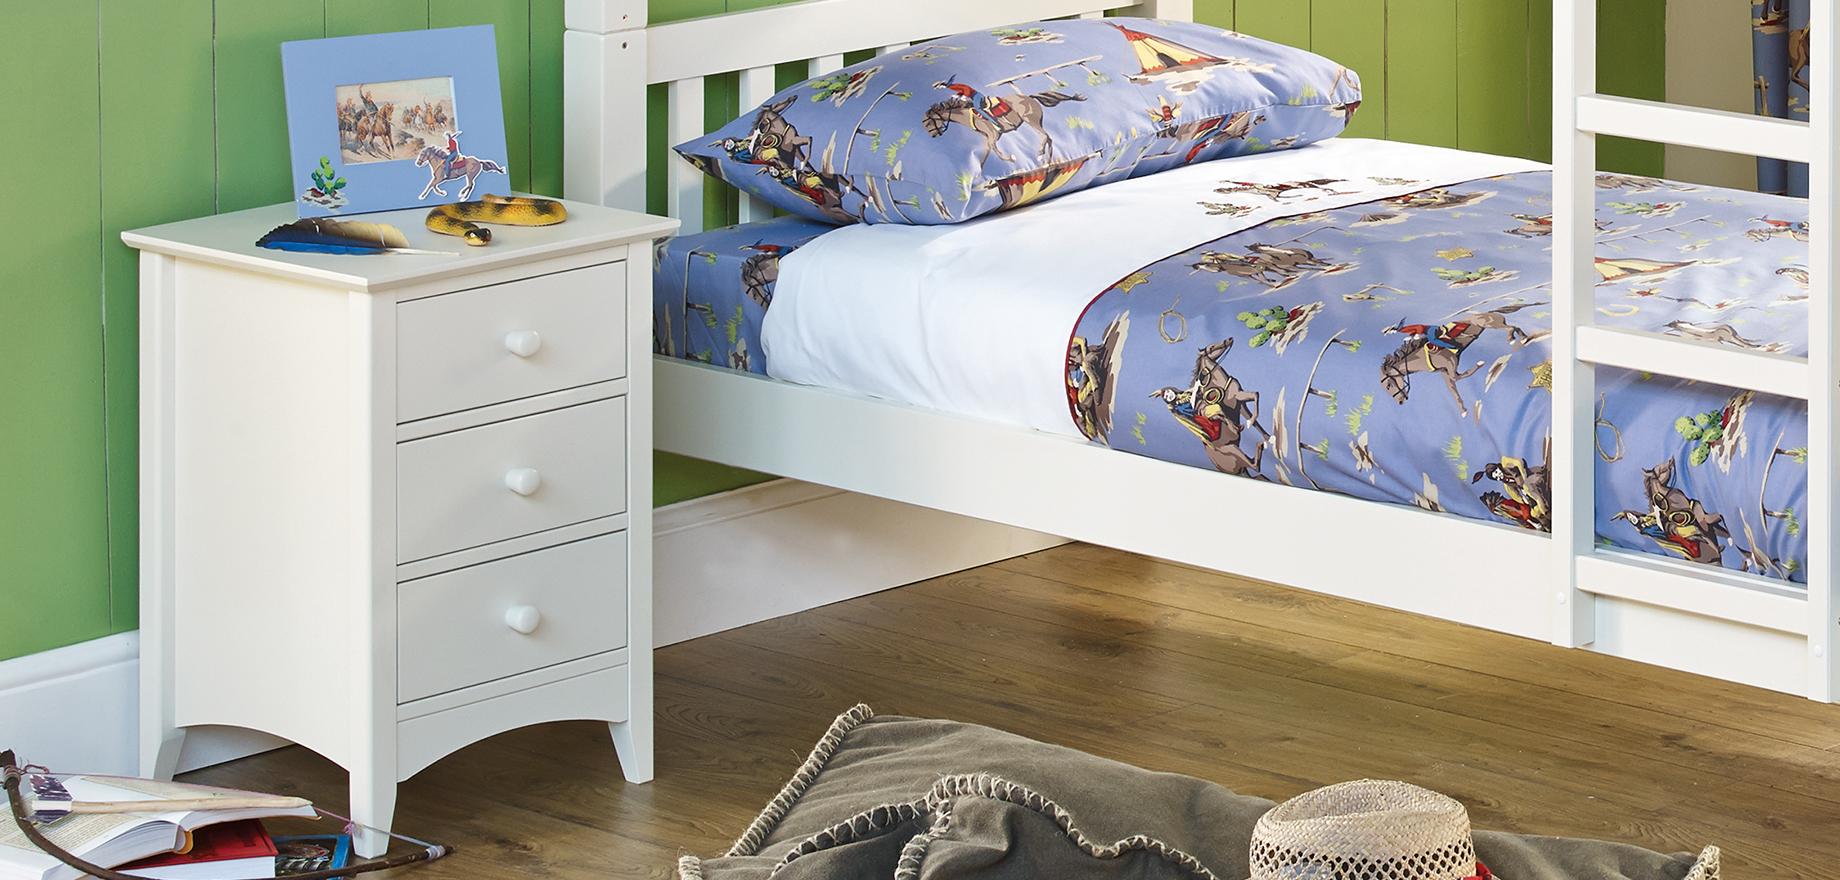 Cheap Childrens Bedroom Furniture Packages ~ Children